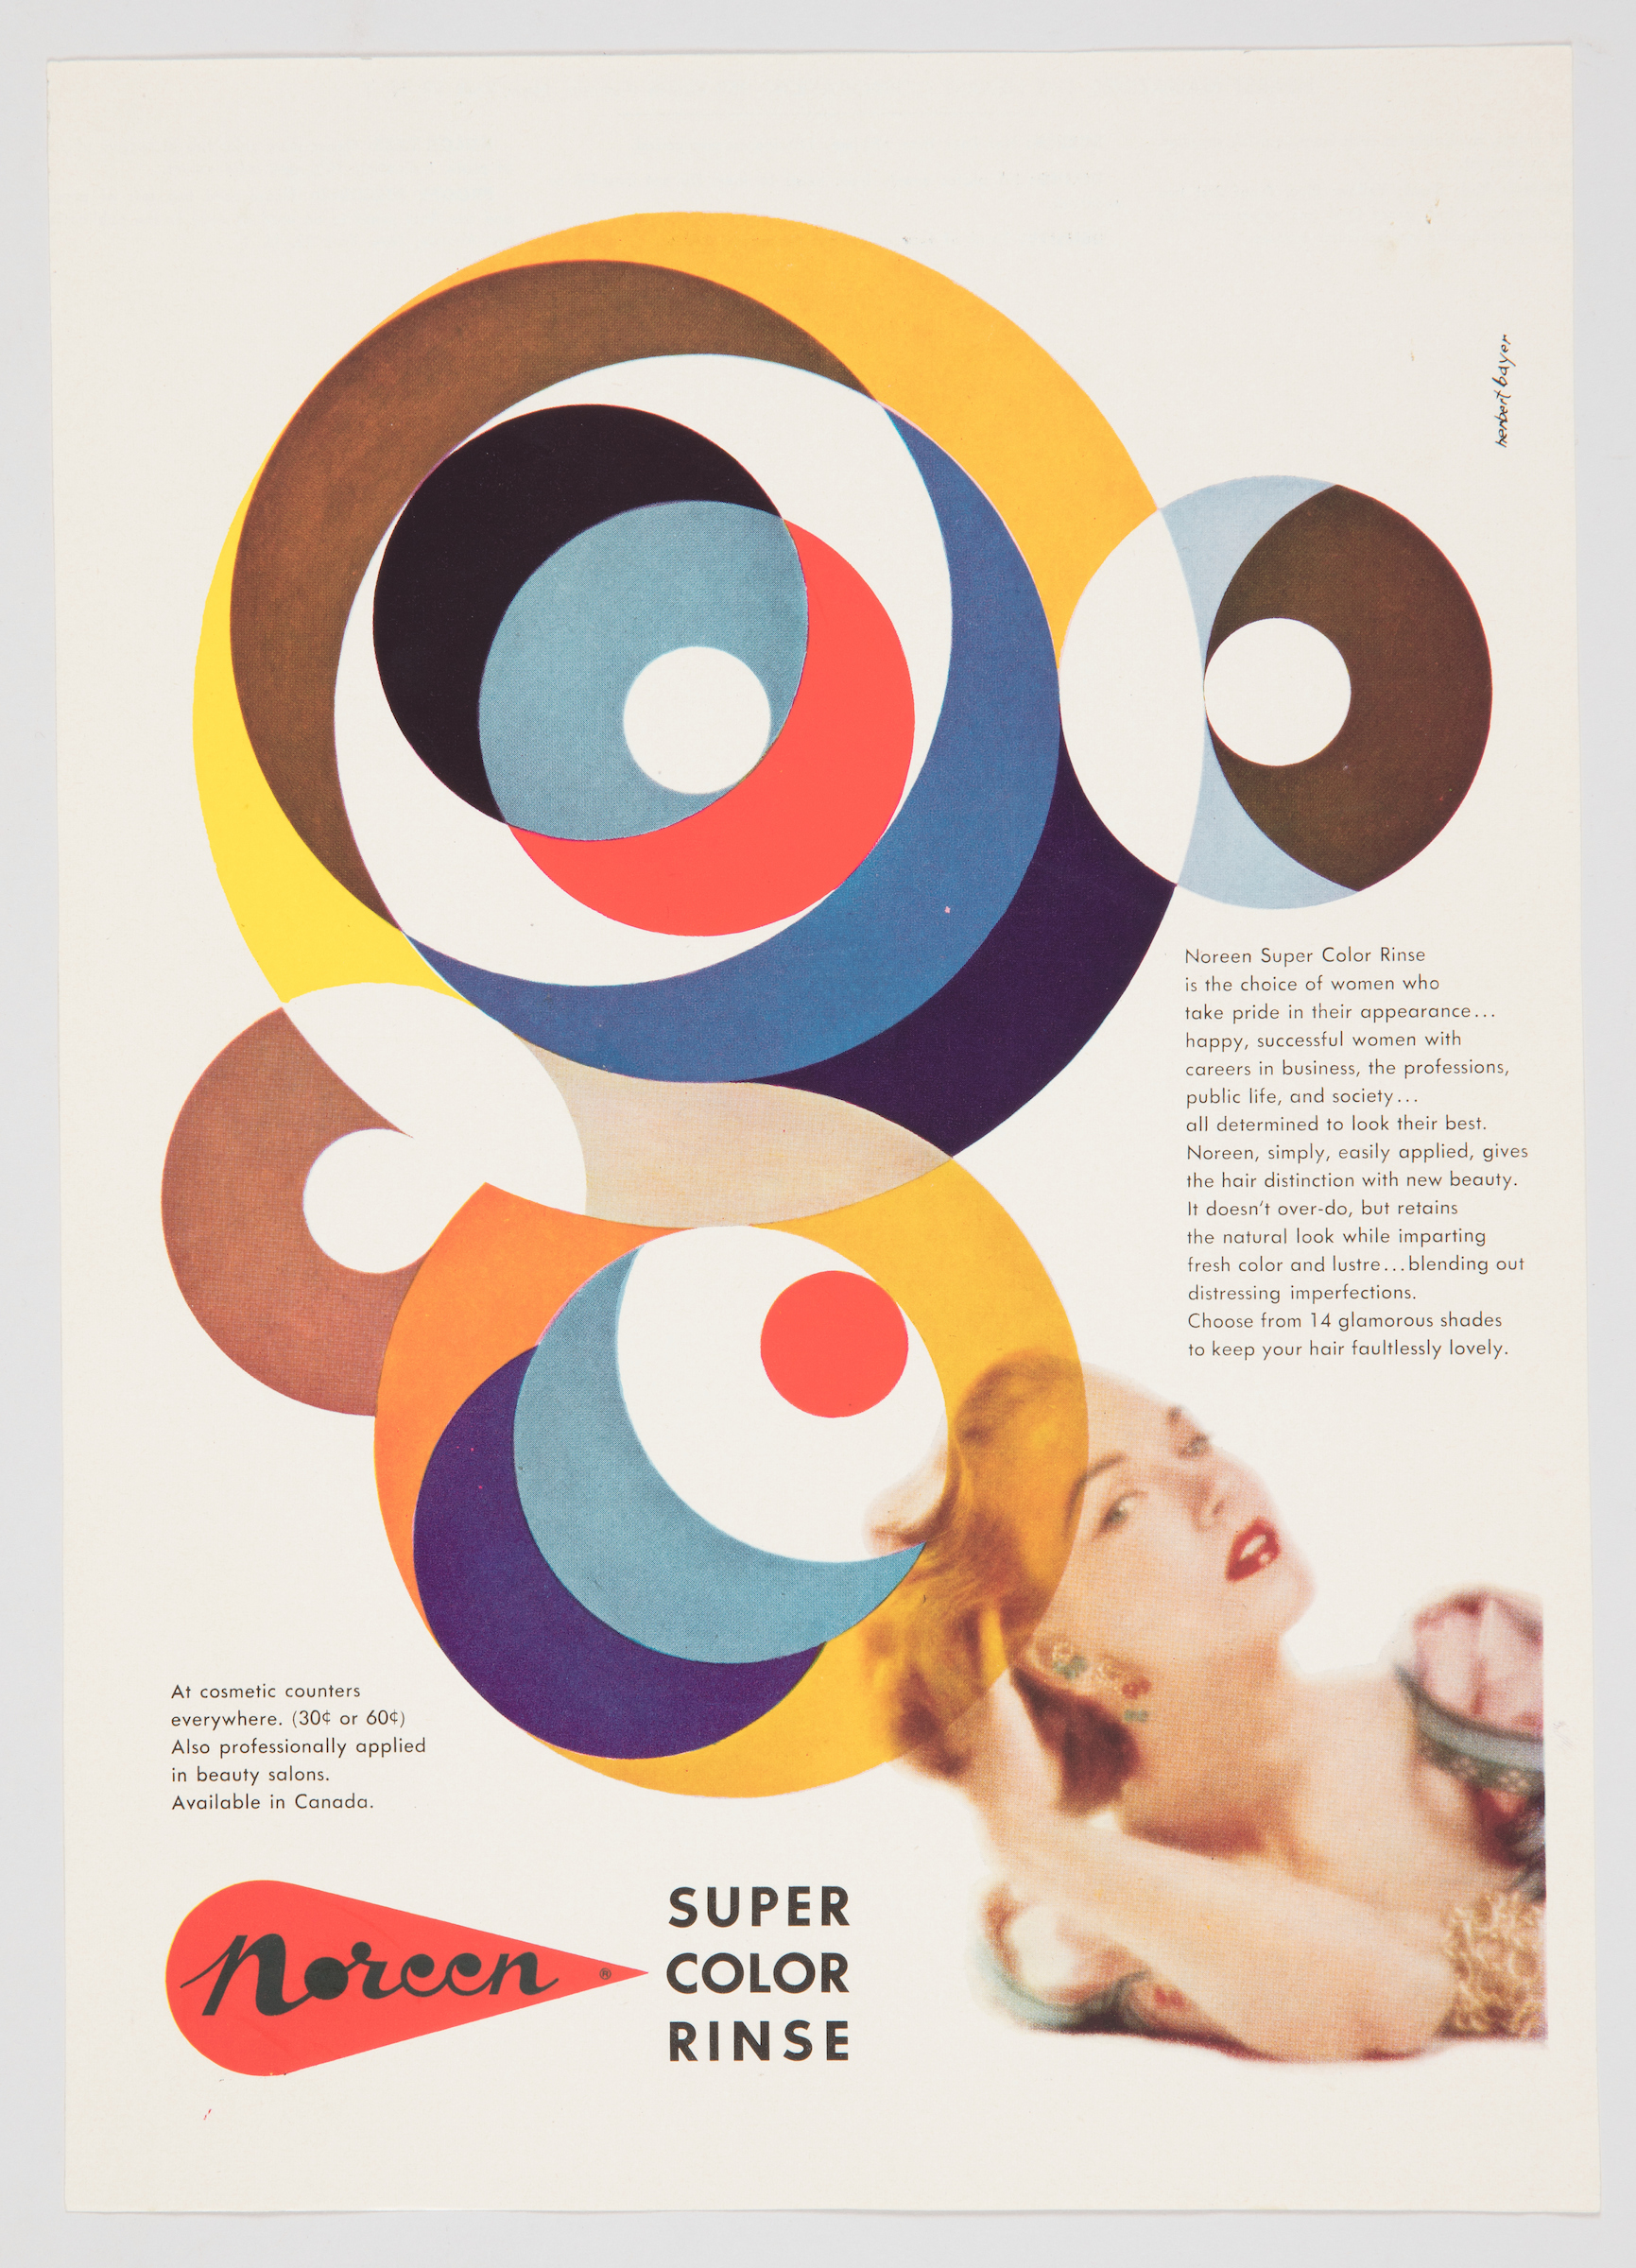 In a vintage advertisement for a magazine, a model wearing ruby-red lipstick tousles her blonde hair. The form of her polished curls is amplified in a colorful abstract montage of pale blue, white, orange, and black circles. The circles overlap to create a figure 